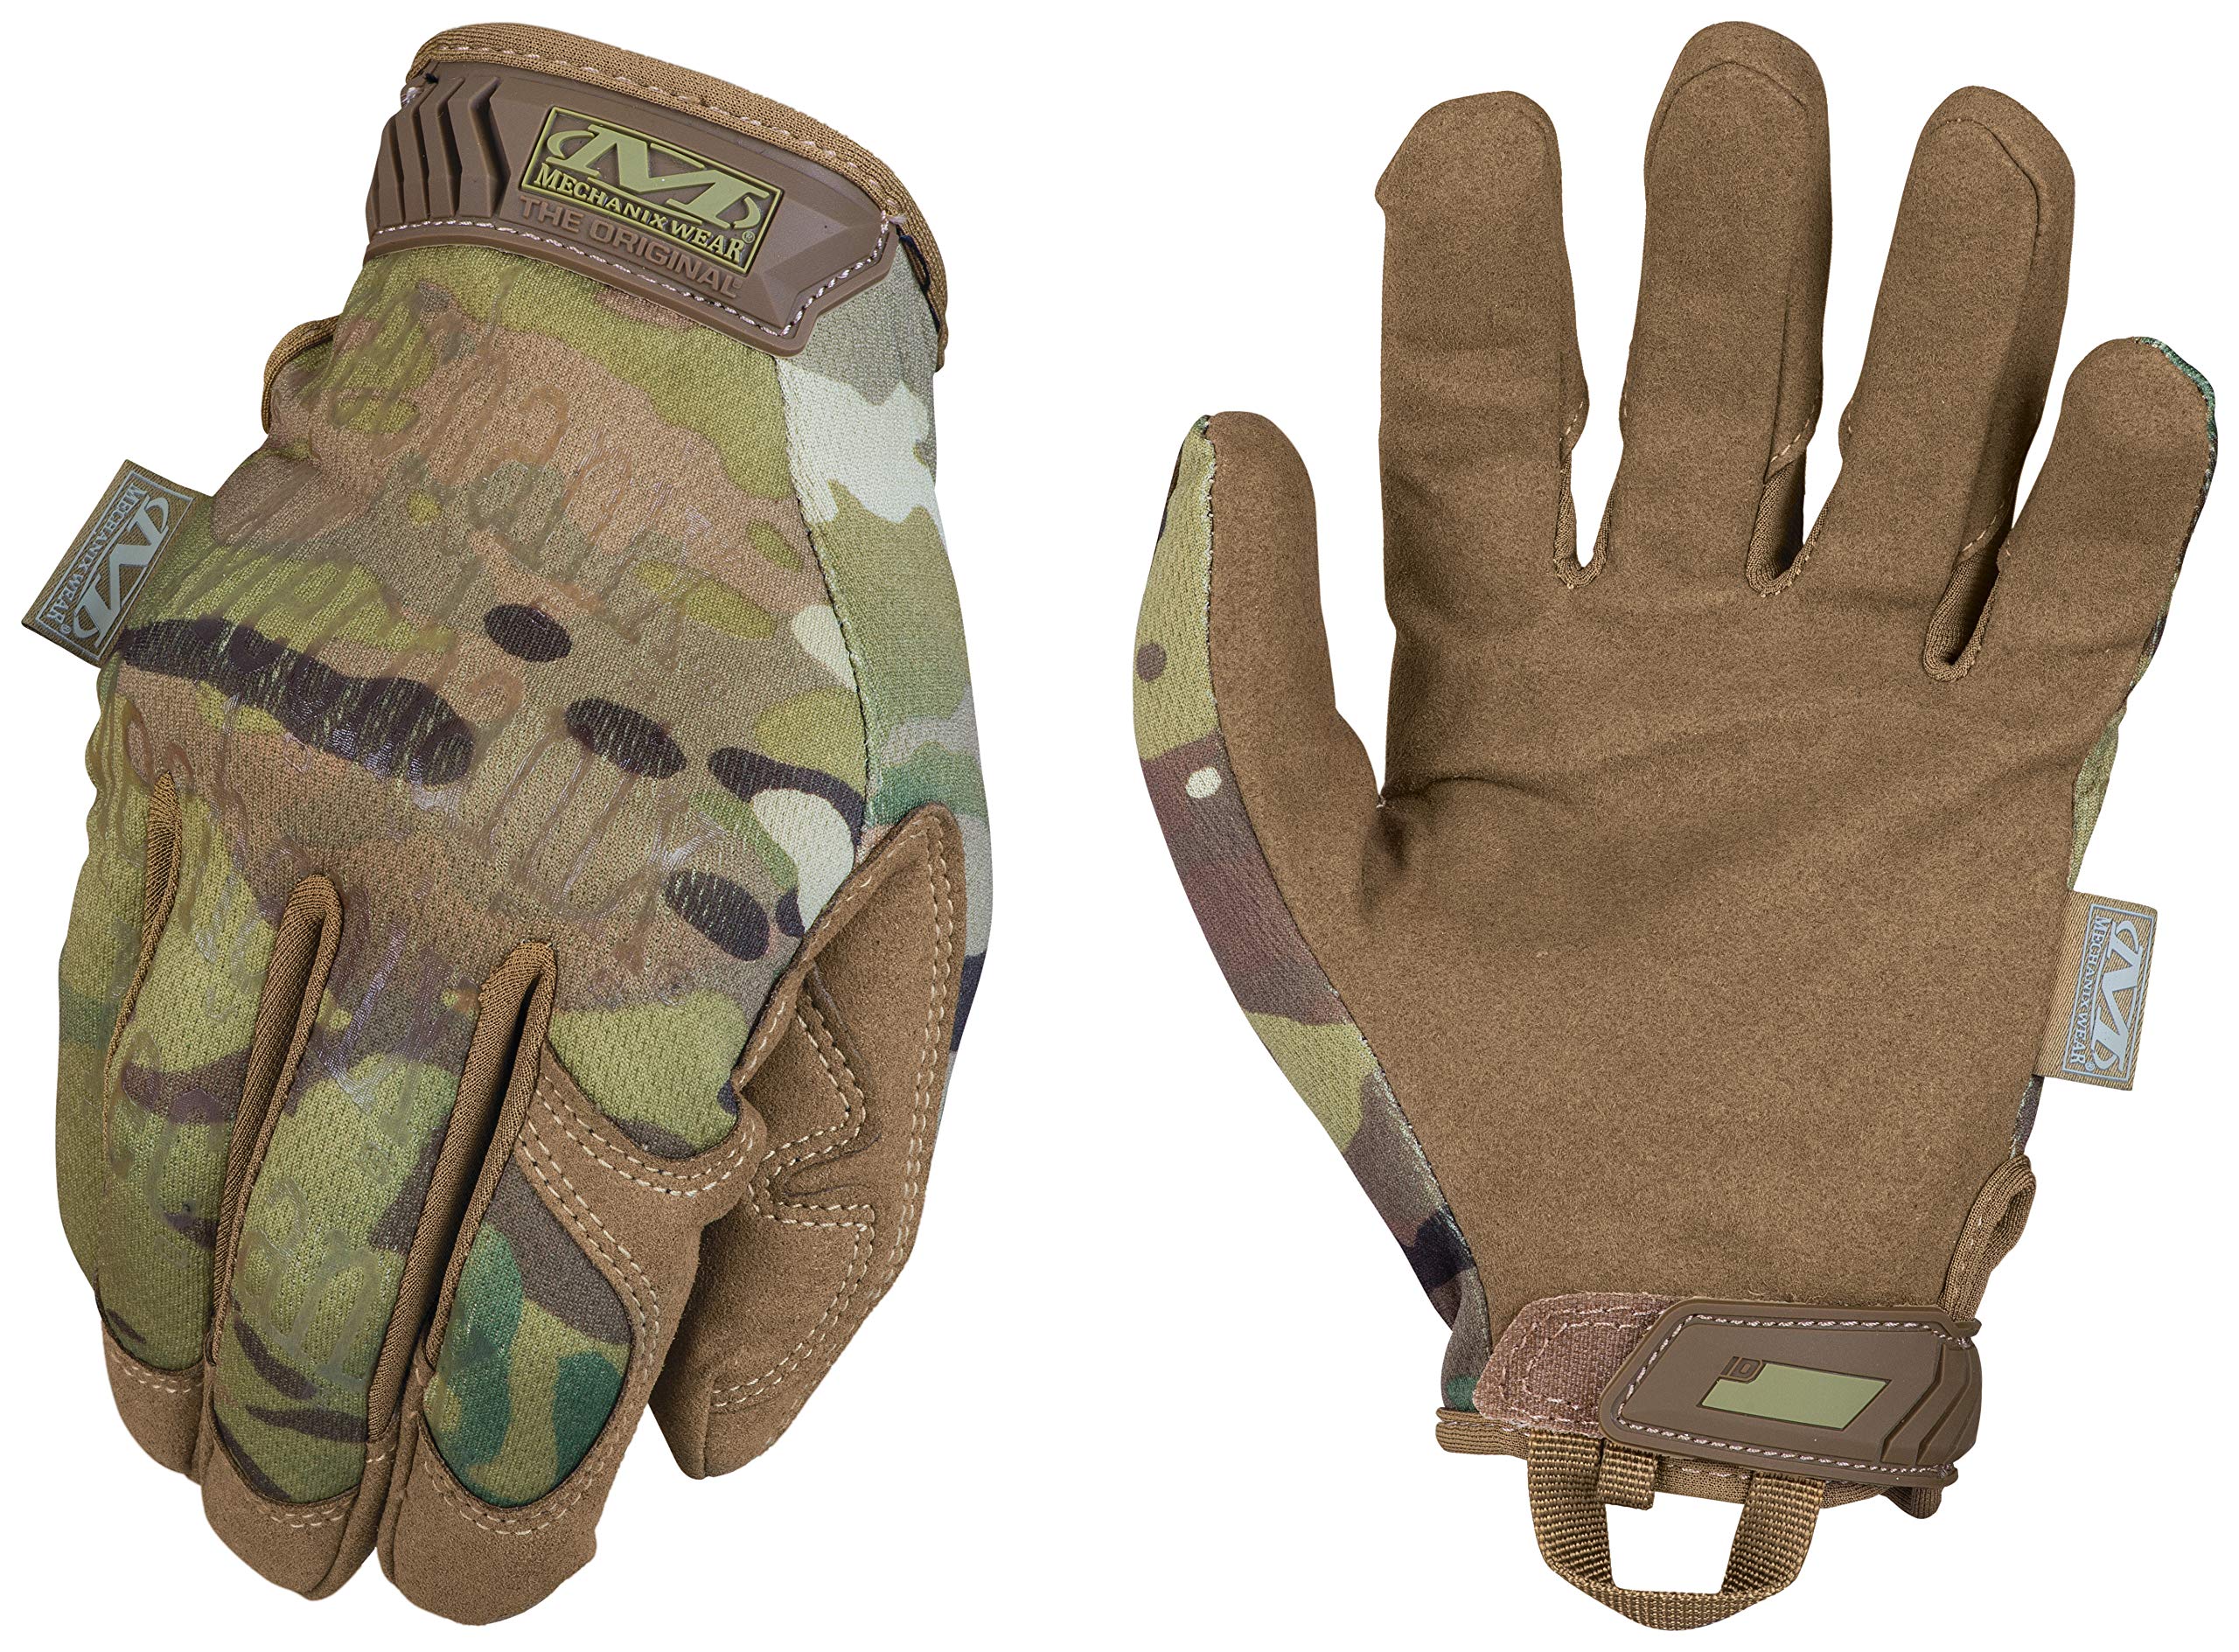 Mechanix Wear: The Original Tactical Work Gloves with Secure Fit, Flexible Grip for Multi-Purpose Use, Durable Touchscreen Safety Gloves for Men (Camouflage - MultiCam, XX-Large)